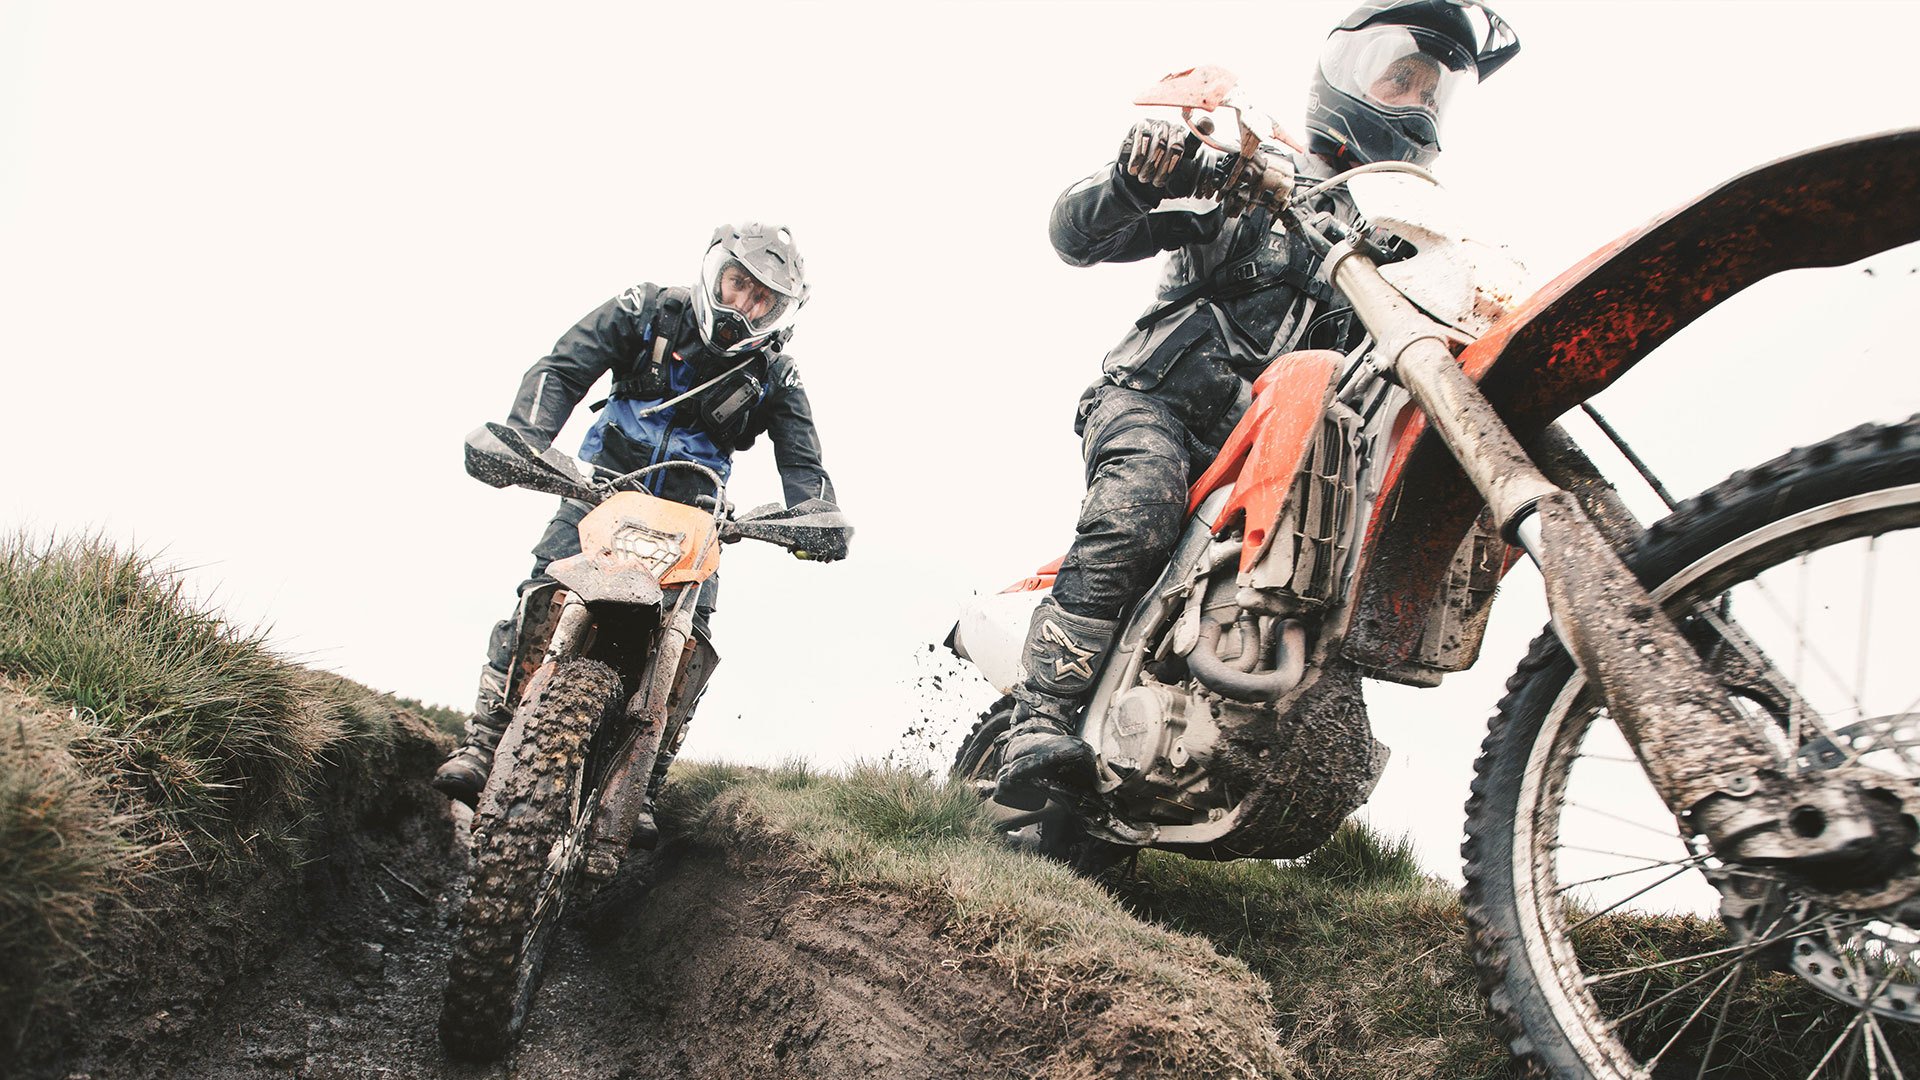 Throttle Out: 2, Episode 3 - Racing the Isle of Man on Dirt Bikes